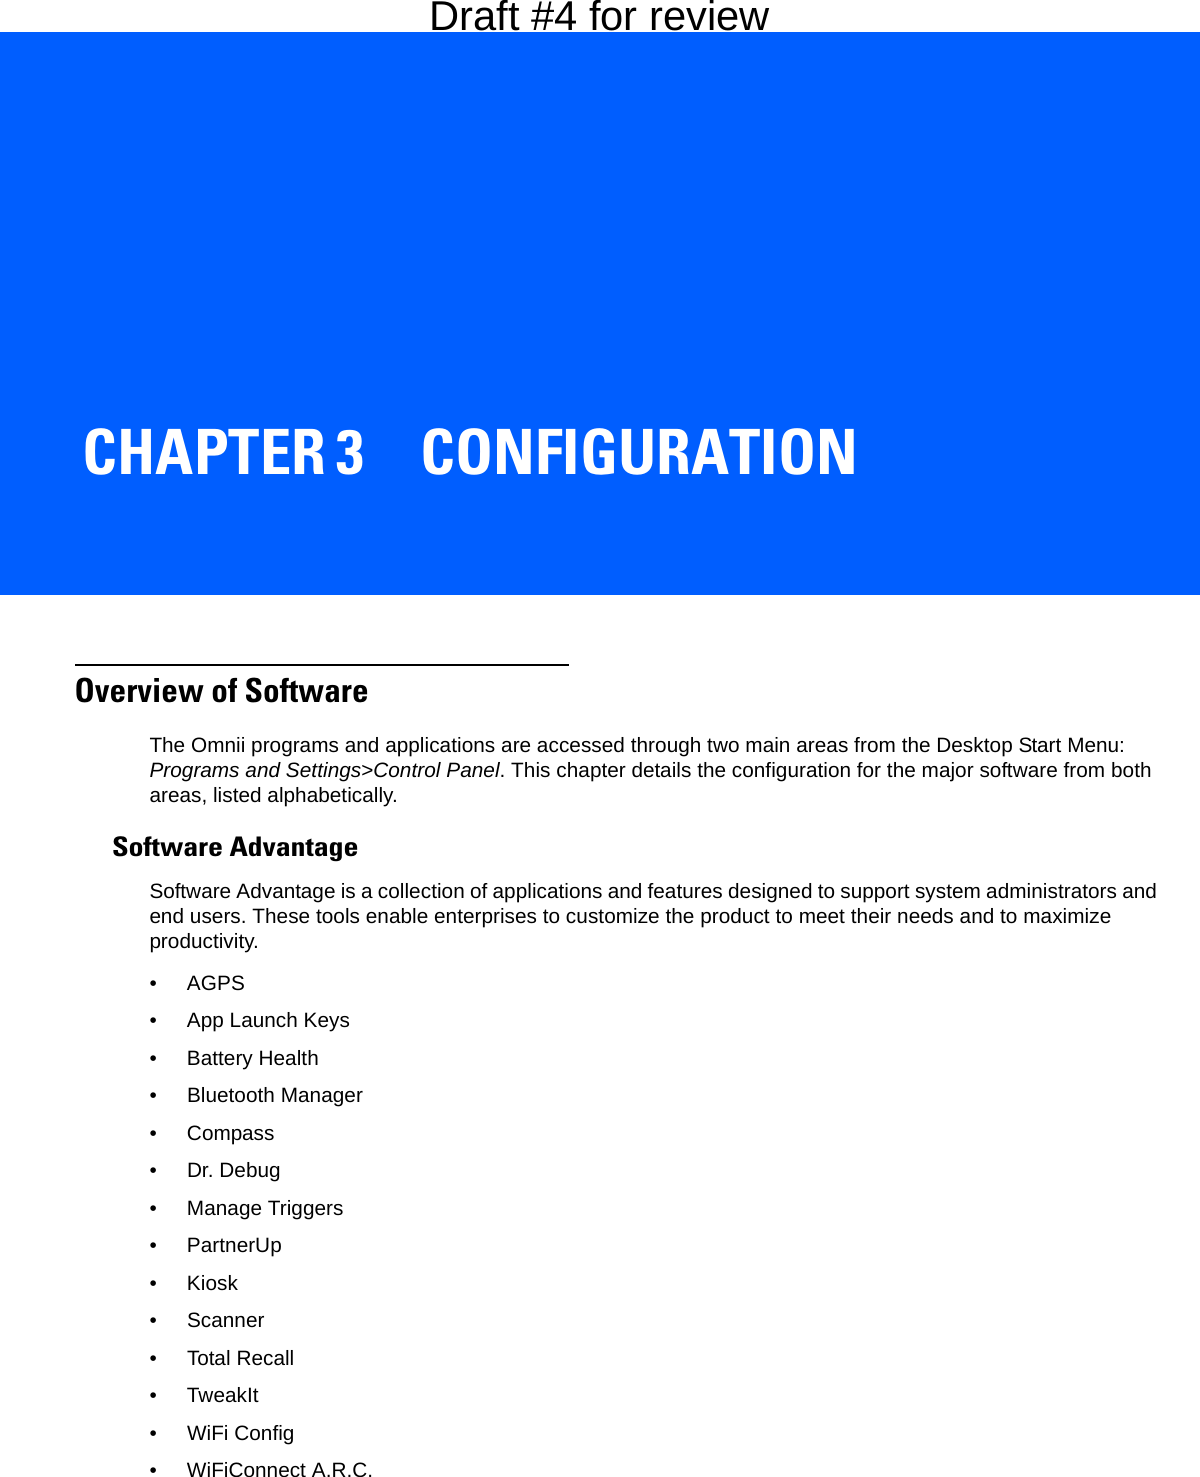 CHAPTER 3 CONFIGURATIONCONFIGURATION 3Overview of SoftwareThe Omnii programs and applications are accessed through two main areas from the Desktop Start Menu: Programs and Settings&gt;Control Panel. This chapter details the configuration for the major software from both areas, listed alphabetically. Software AdvantageSoftware Advantage is a collection of applications and features designed to support system administrators and end users. These tools enable enterprises to customize the product to meet their needs and to maximize productivity.•AGPS• App Launch Keys• Battery Health• Bluetooth Manager•Compass• Dr. Debug• Manage Triggers• PartnerUp•Kiosk• Scanner• Total Recall•TweakIt• WiFi Config• WiFiConnect A.R.C.Draft #4 for review